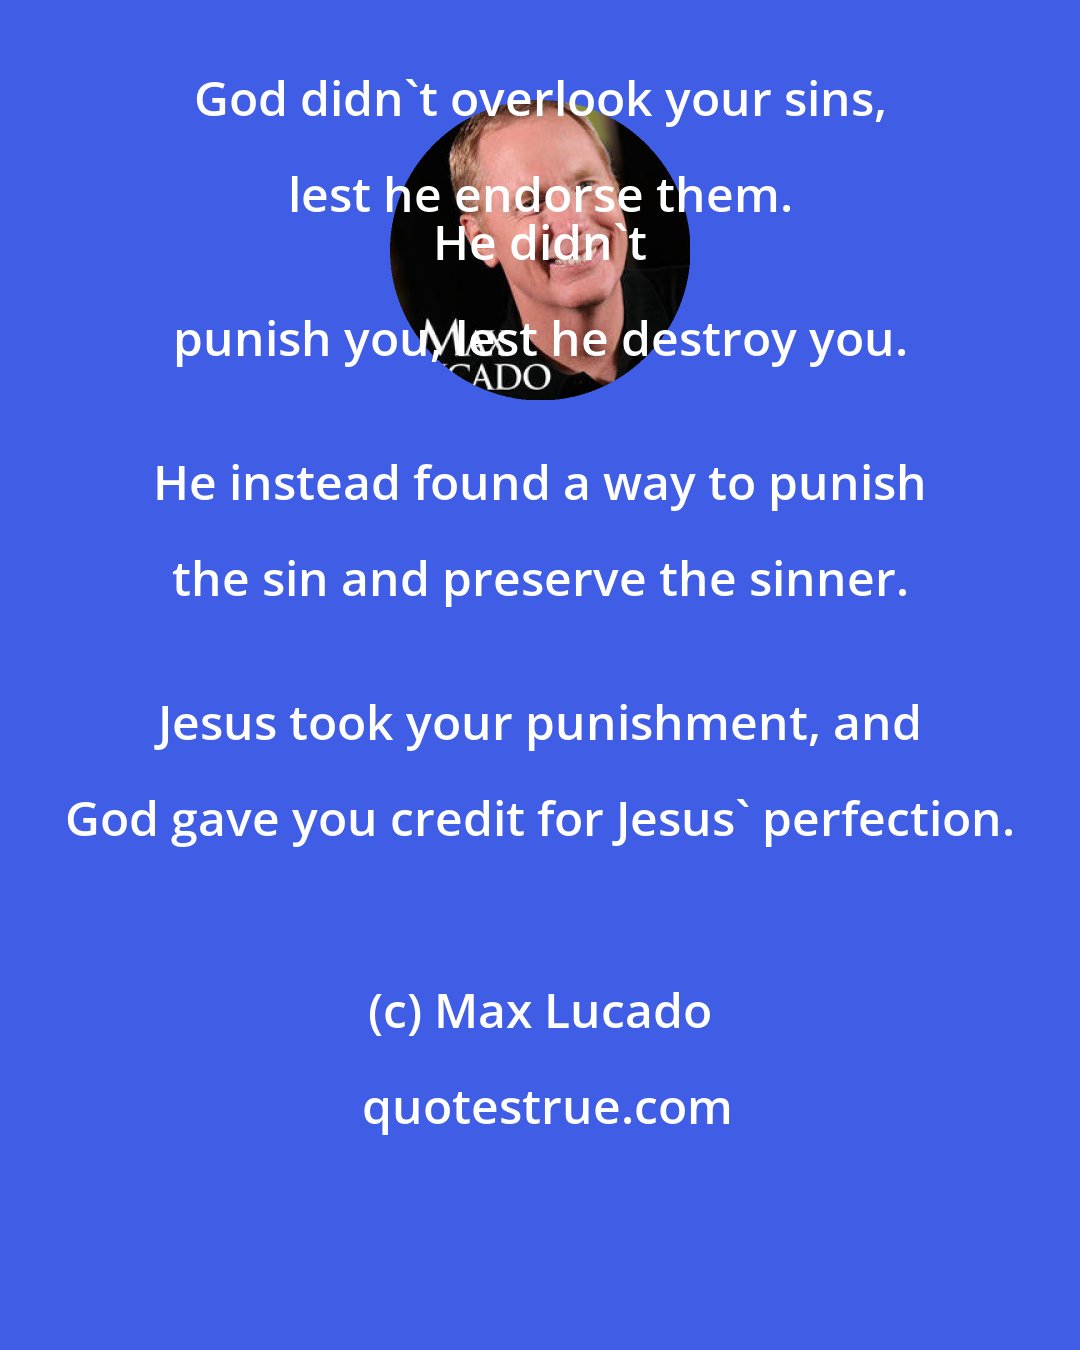 Max Lucado: God didn't overlook your sins, lest he endorse them. 
 He didn't punish you, lest he destroy you. 
 He instead found a way to punish the sin and preserve the sinner. 
 Jesus took your punishment, and God gave you credit for Jesus' perfection.